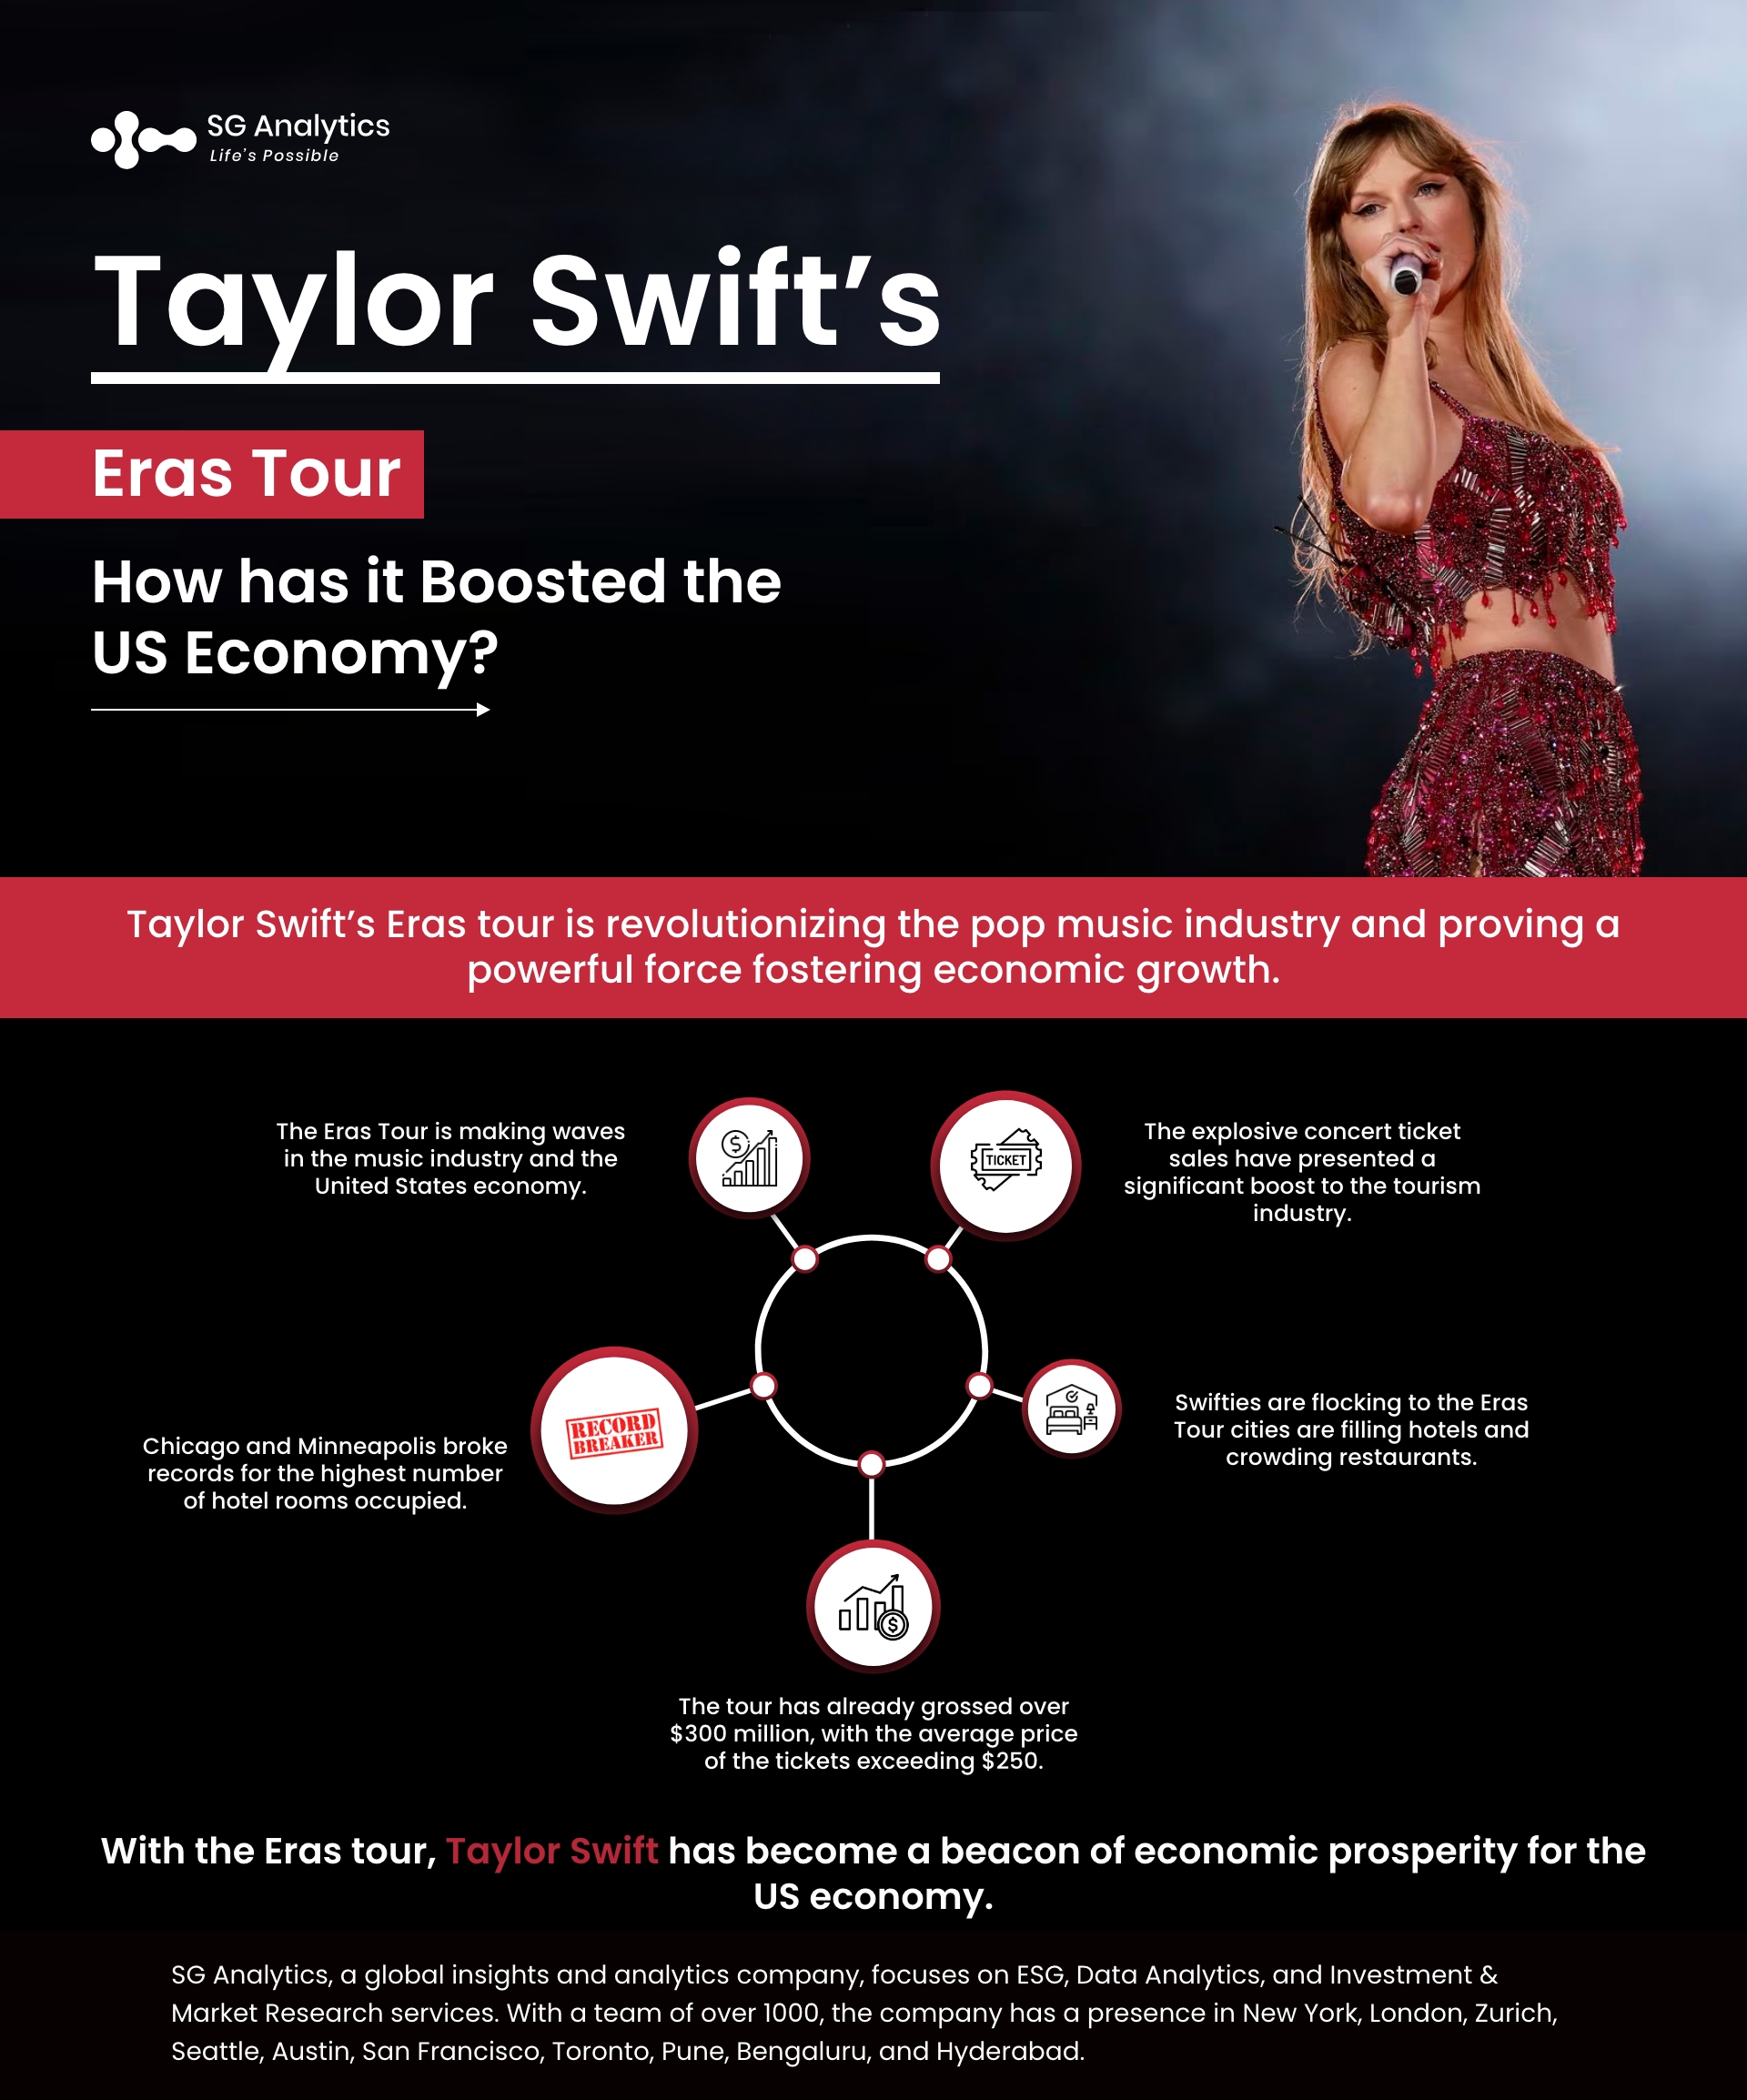 How Taylor Swift’s Eras Tour has Boosted the US Economy